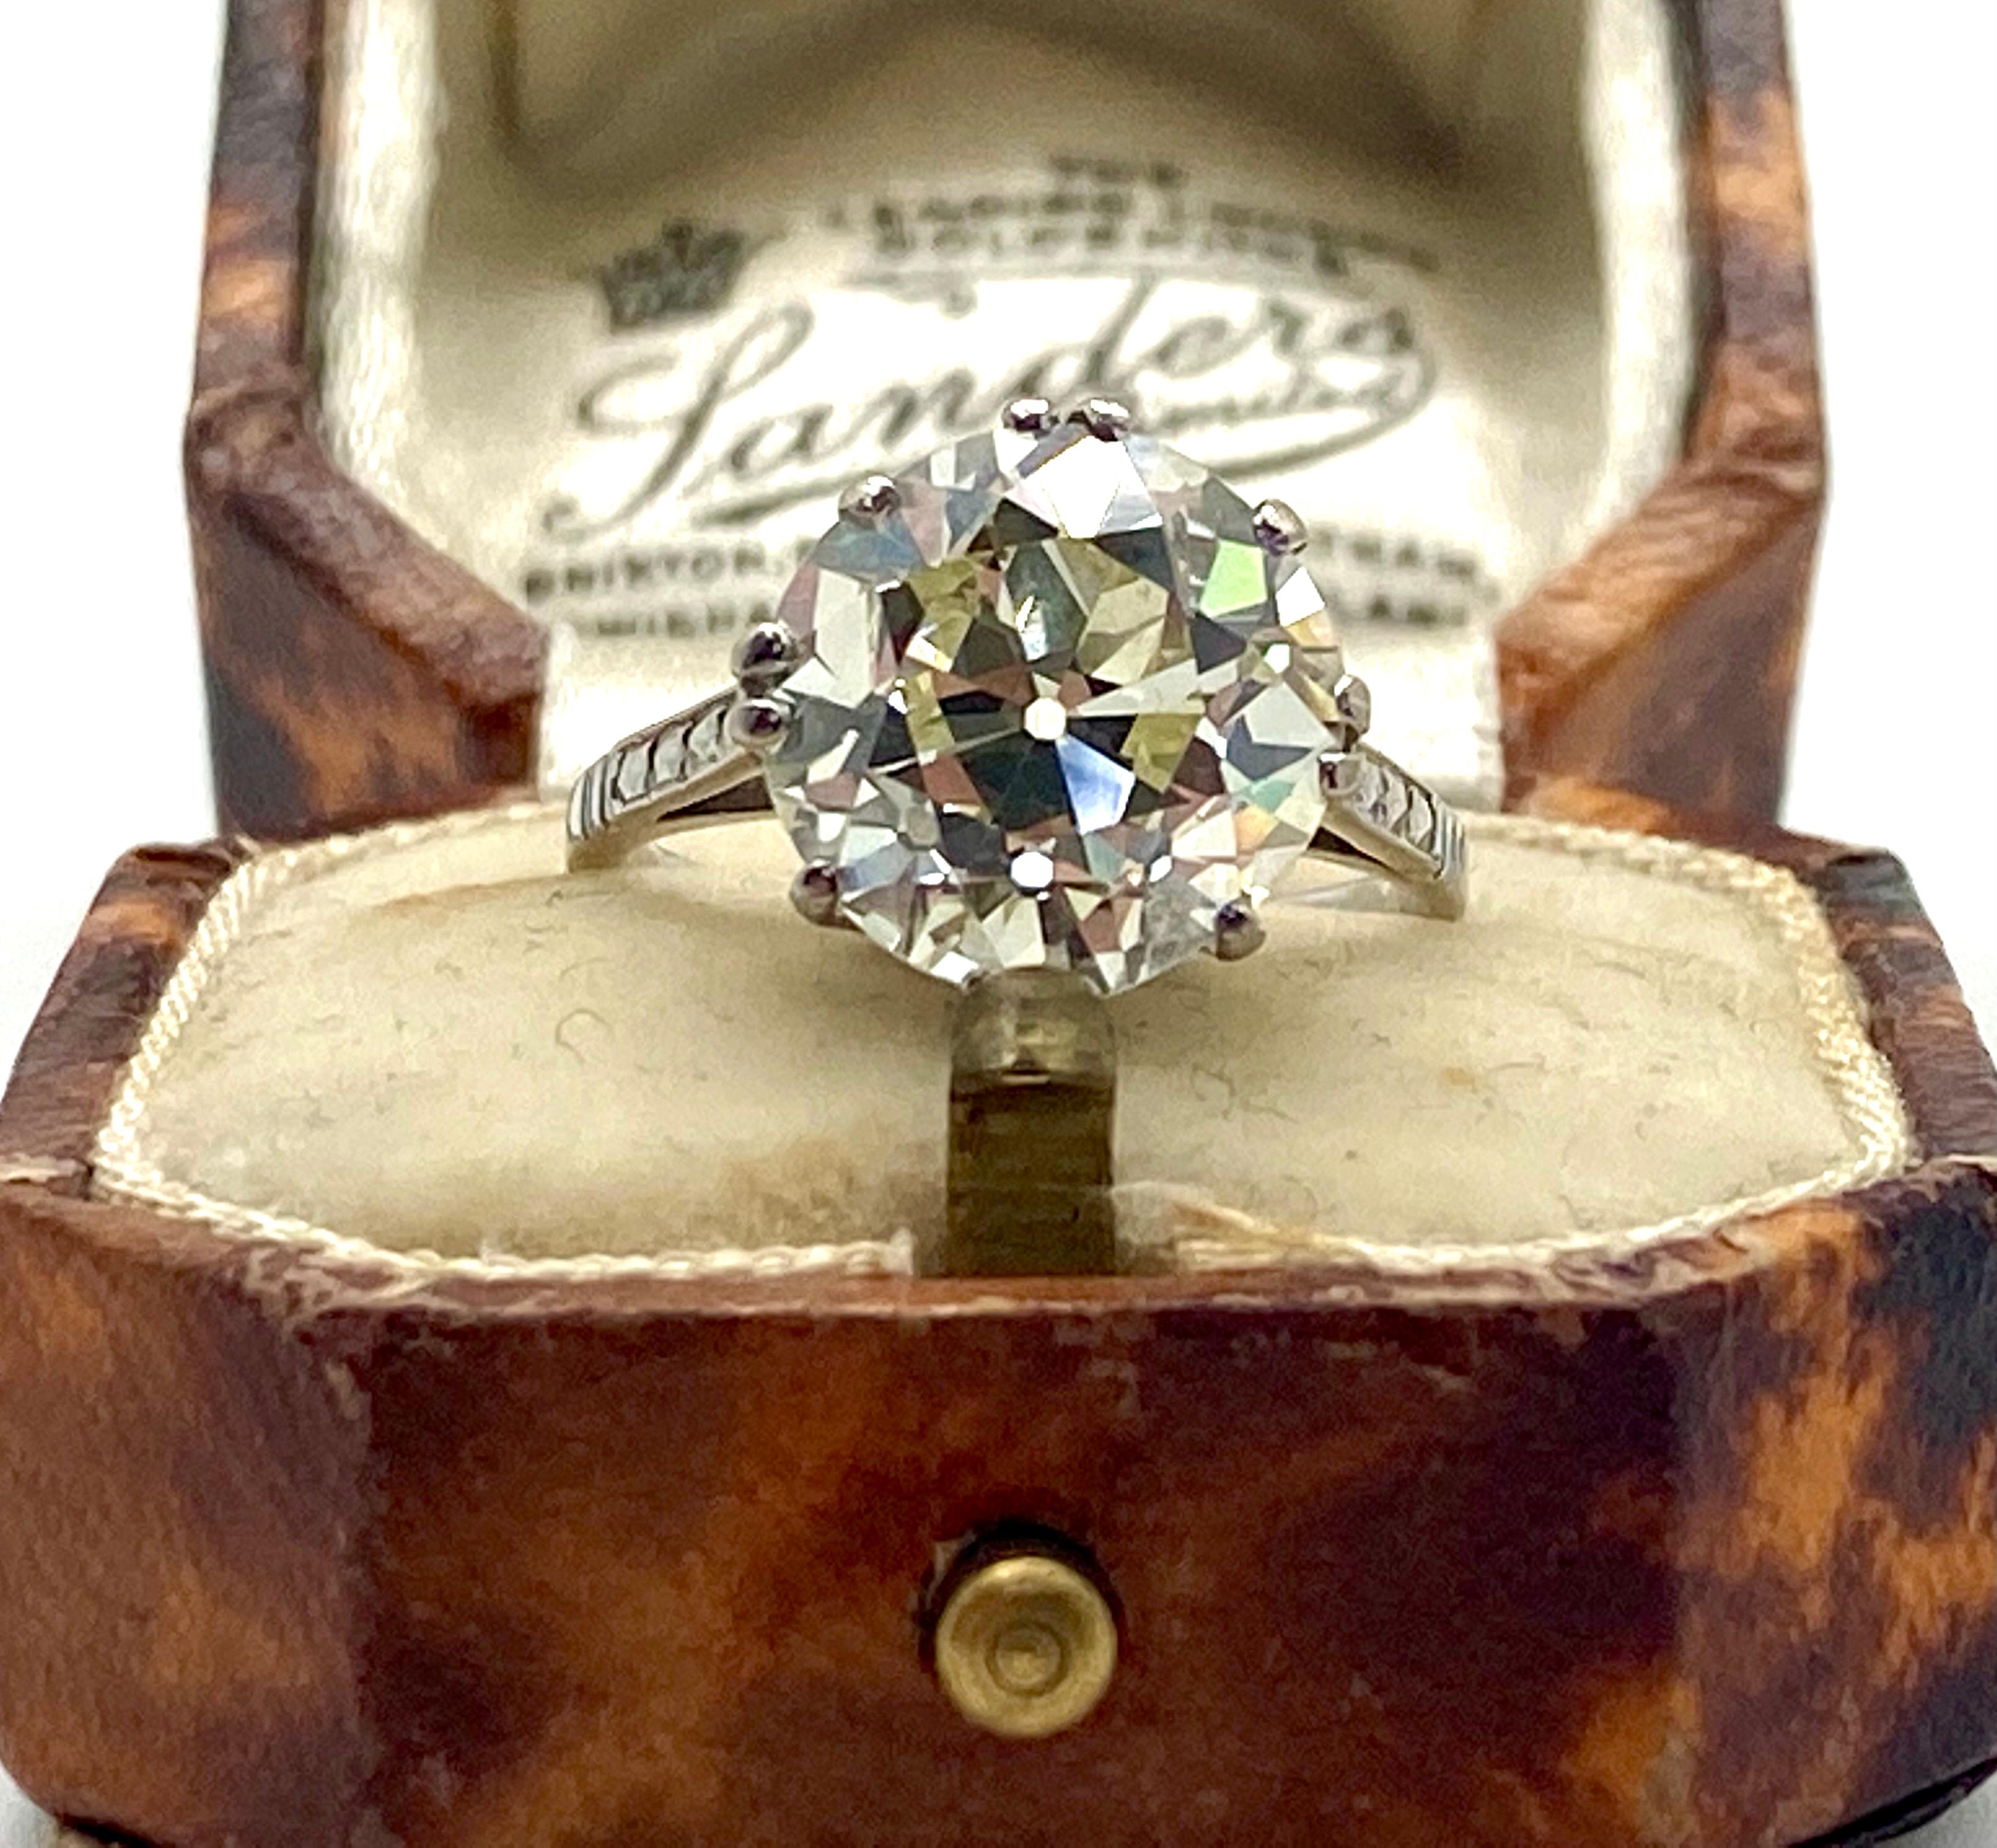 Amazing Estate 5.03 ct Old European Cut Diamond Platinum Engagement Ring, that we just purchased from a local estate of a prominent family. This is an amazing stone! The stone has an amazing fire, shine and sparkle!  It's set in a platinum Art Deco